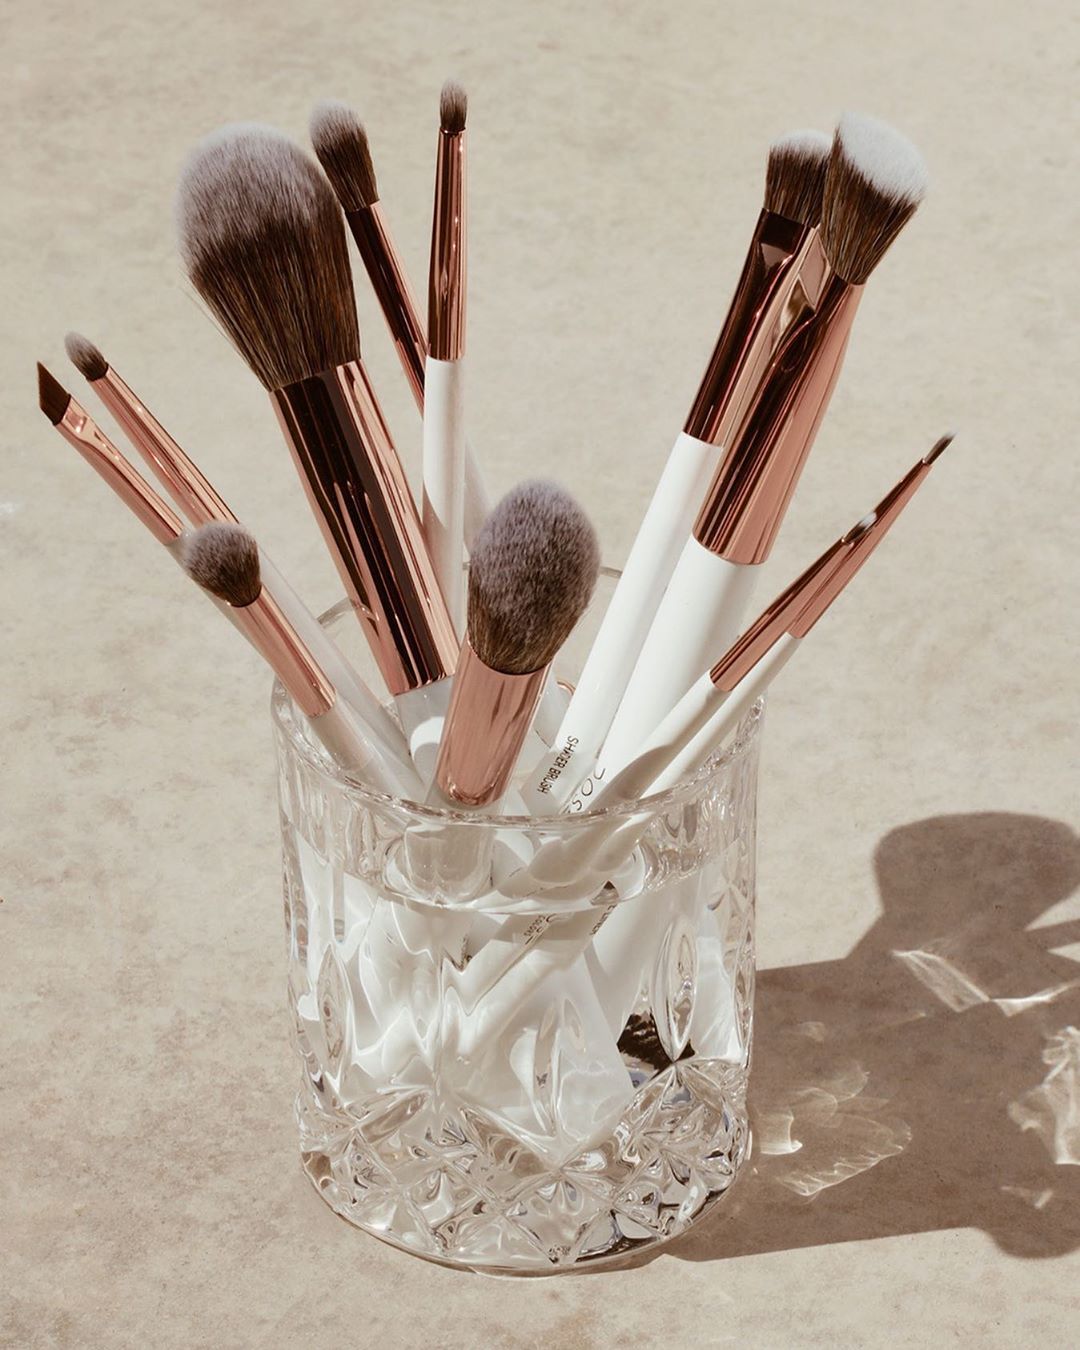 DOSE of COLORS - THE MAGIC TOUCH IS IN THE BRUSH 💫
MEET OUR GAME CHANGING BRUSHES!
~WINGED LINER BRUSH
~PENCIL BRUSH
~LARGE POWDER BRUSH
~BLENDING BRUSH
~SHADER BRUSH
~FLAT CONTOUR BRUSH
~FINE LINER B...